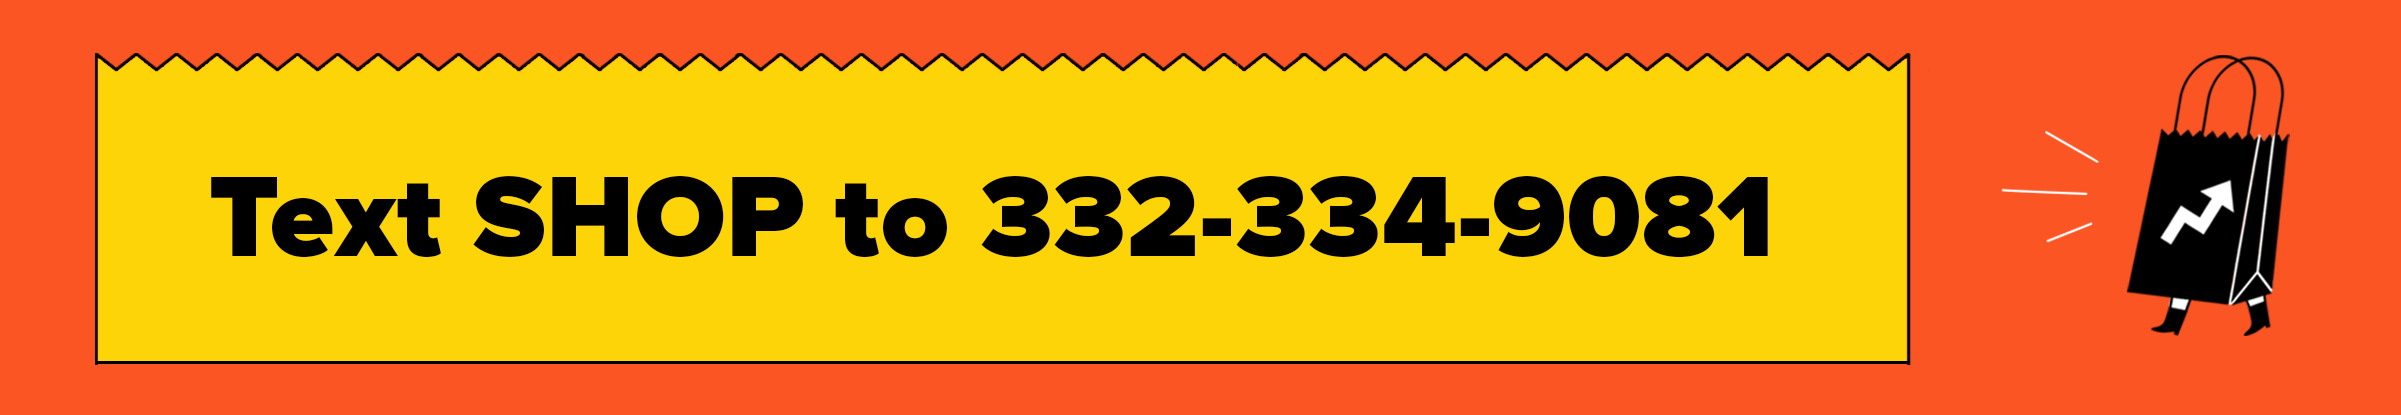 banner that says text shop to 332-334-9081